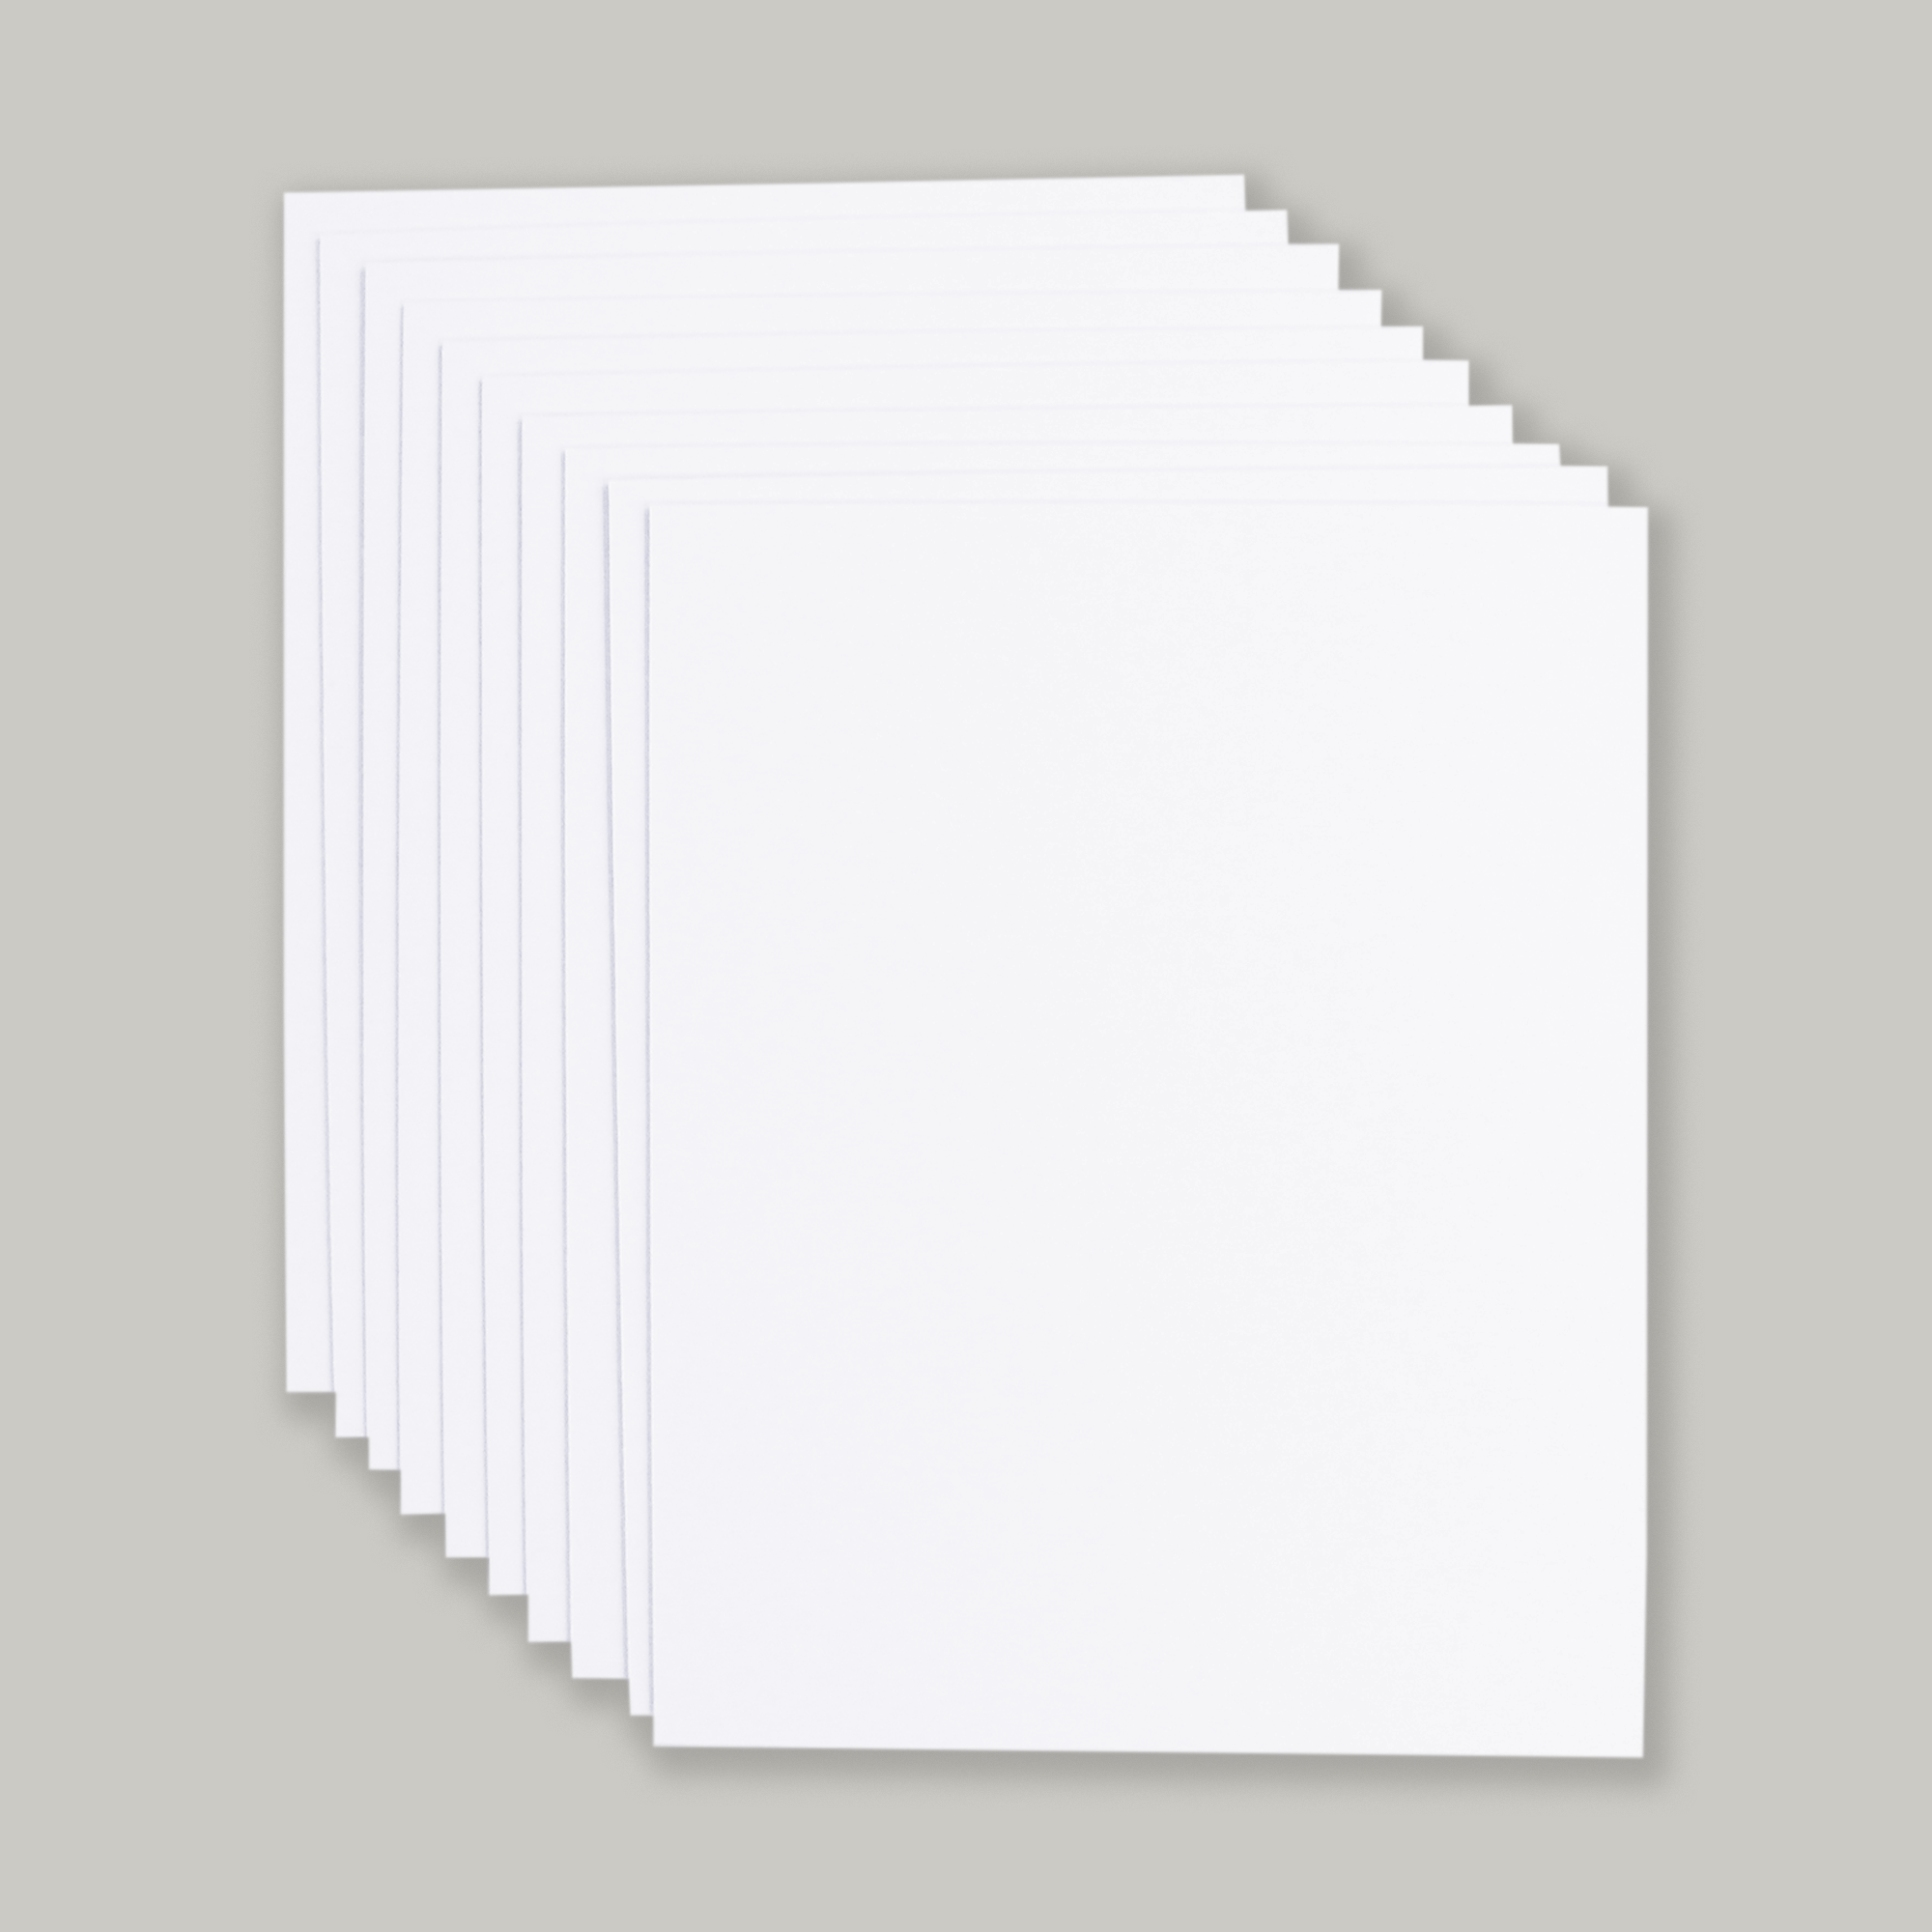 20 x 16" White Backing Boards